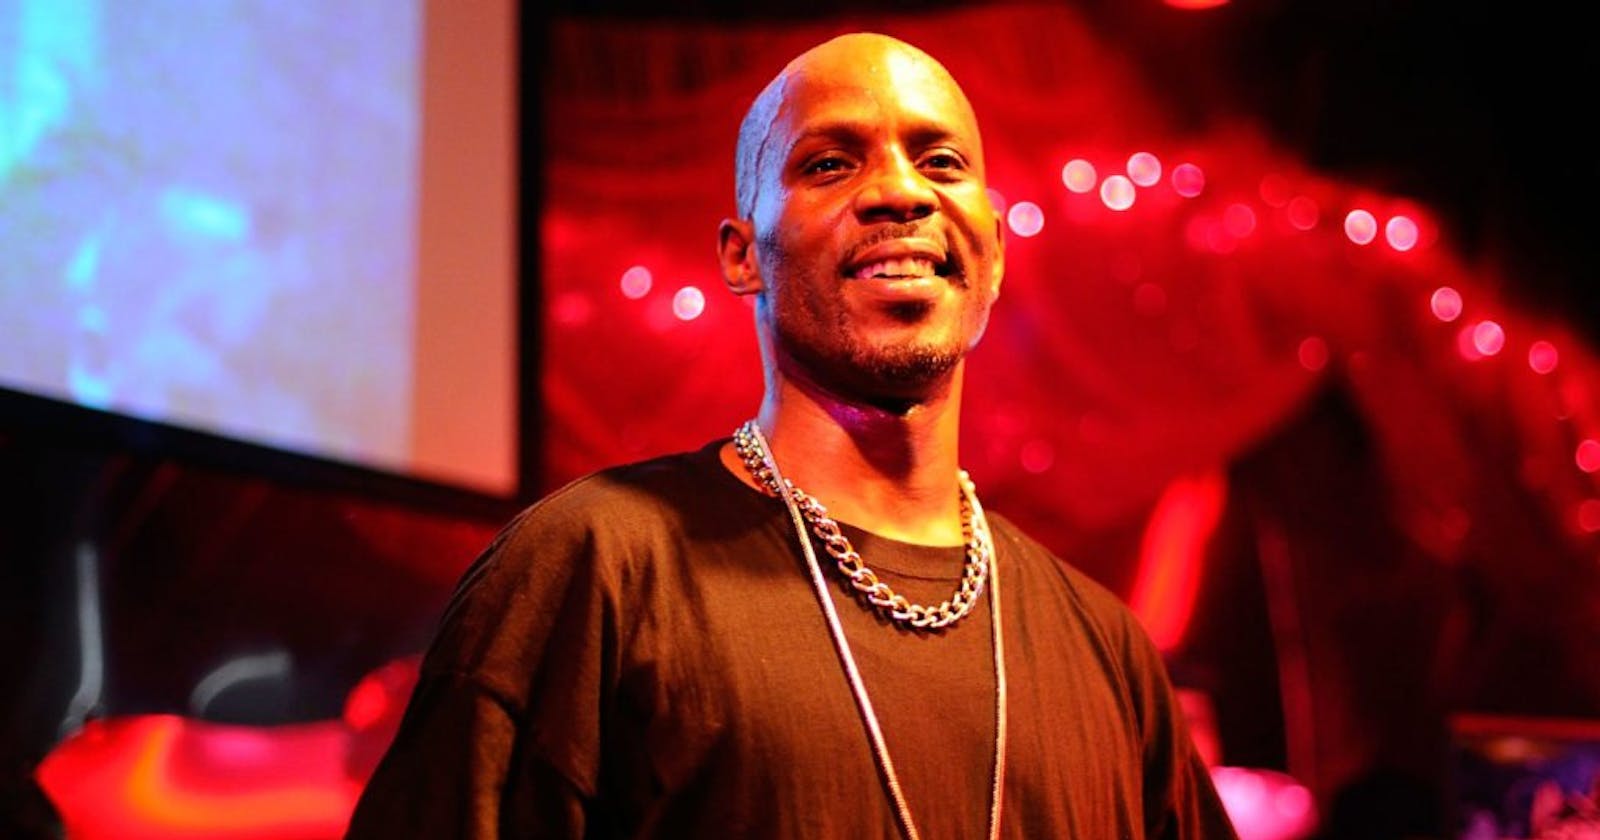 DMX UPDATE: RAPPER IS STILL ON LIFE SUPPORT, FAMILY STATEMENT EXPECTED